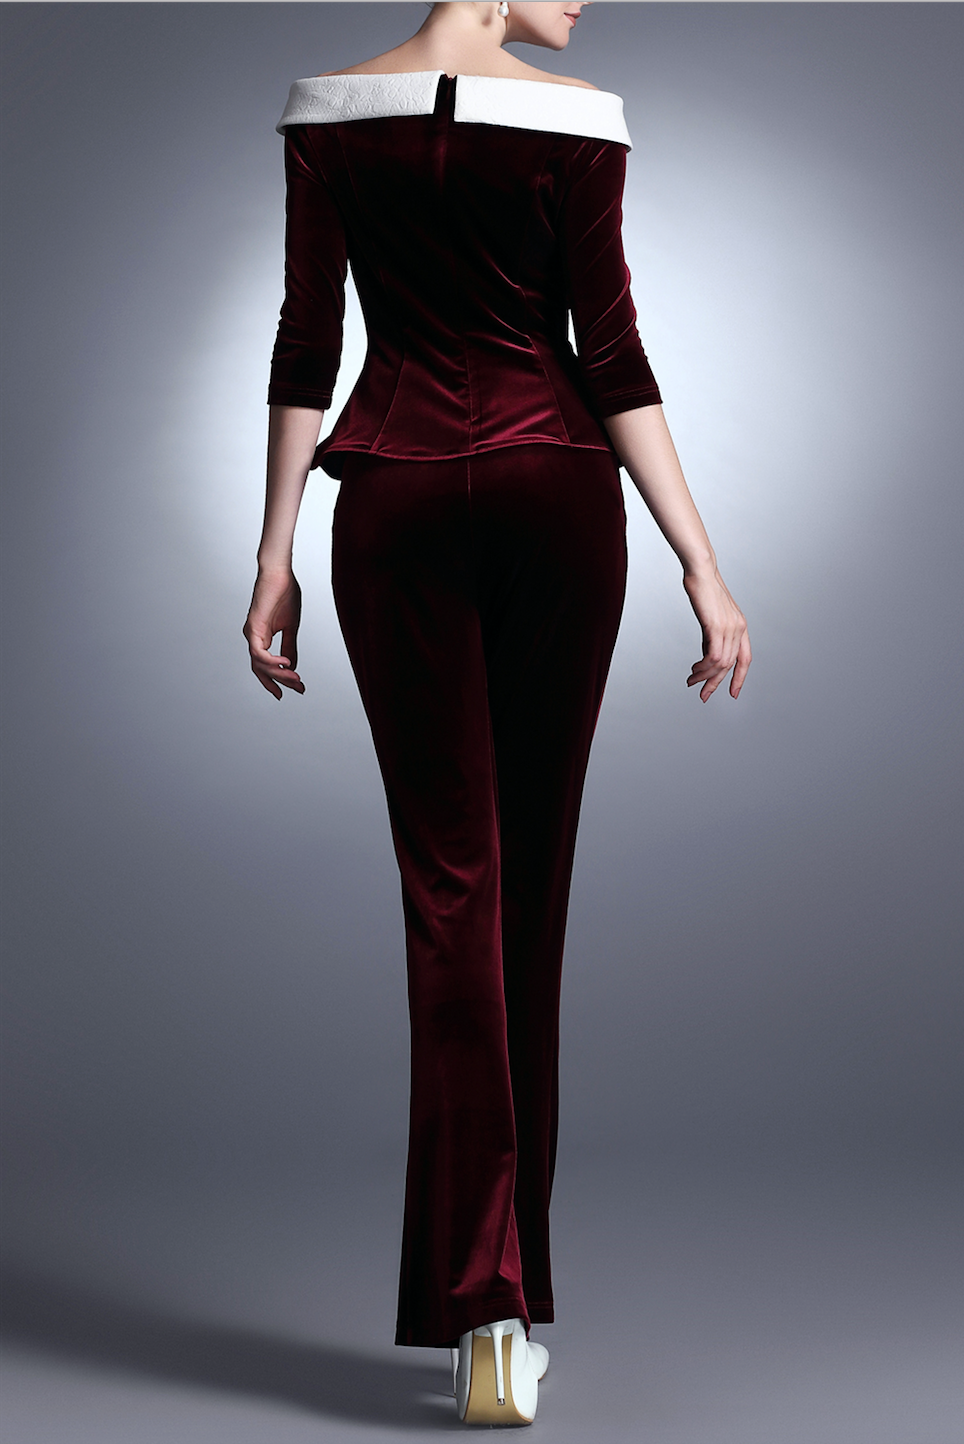 Lily Pants -  Stretchy Velvet Pants - Luxurious, Fun & Multifunctional